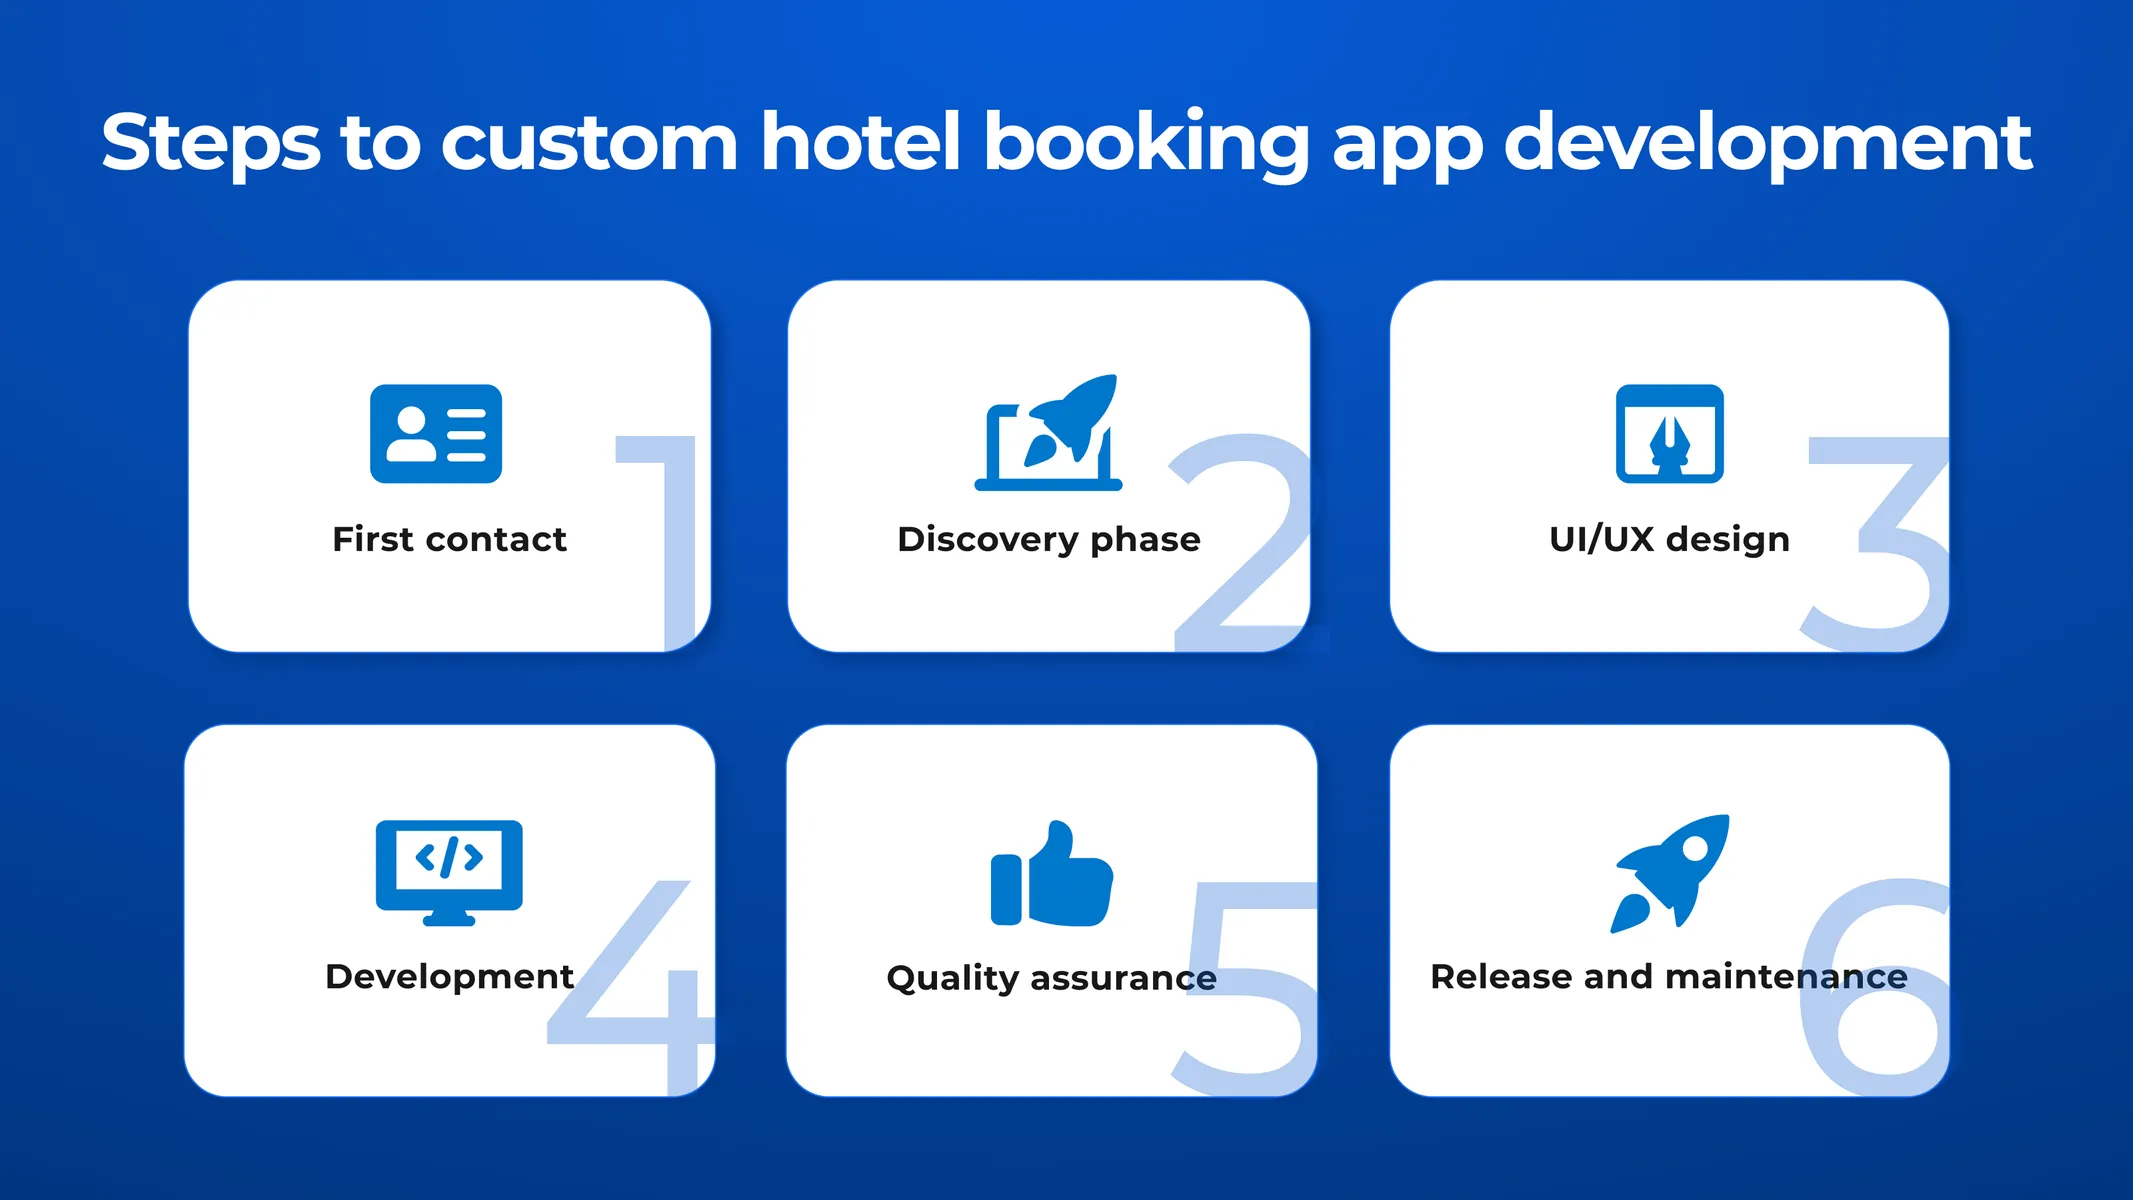 Hotel booking app development stages